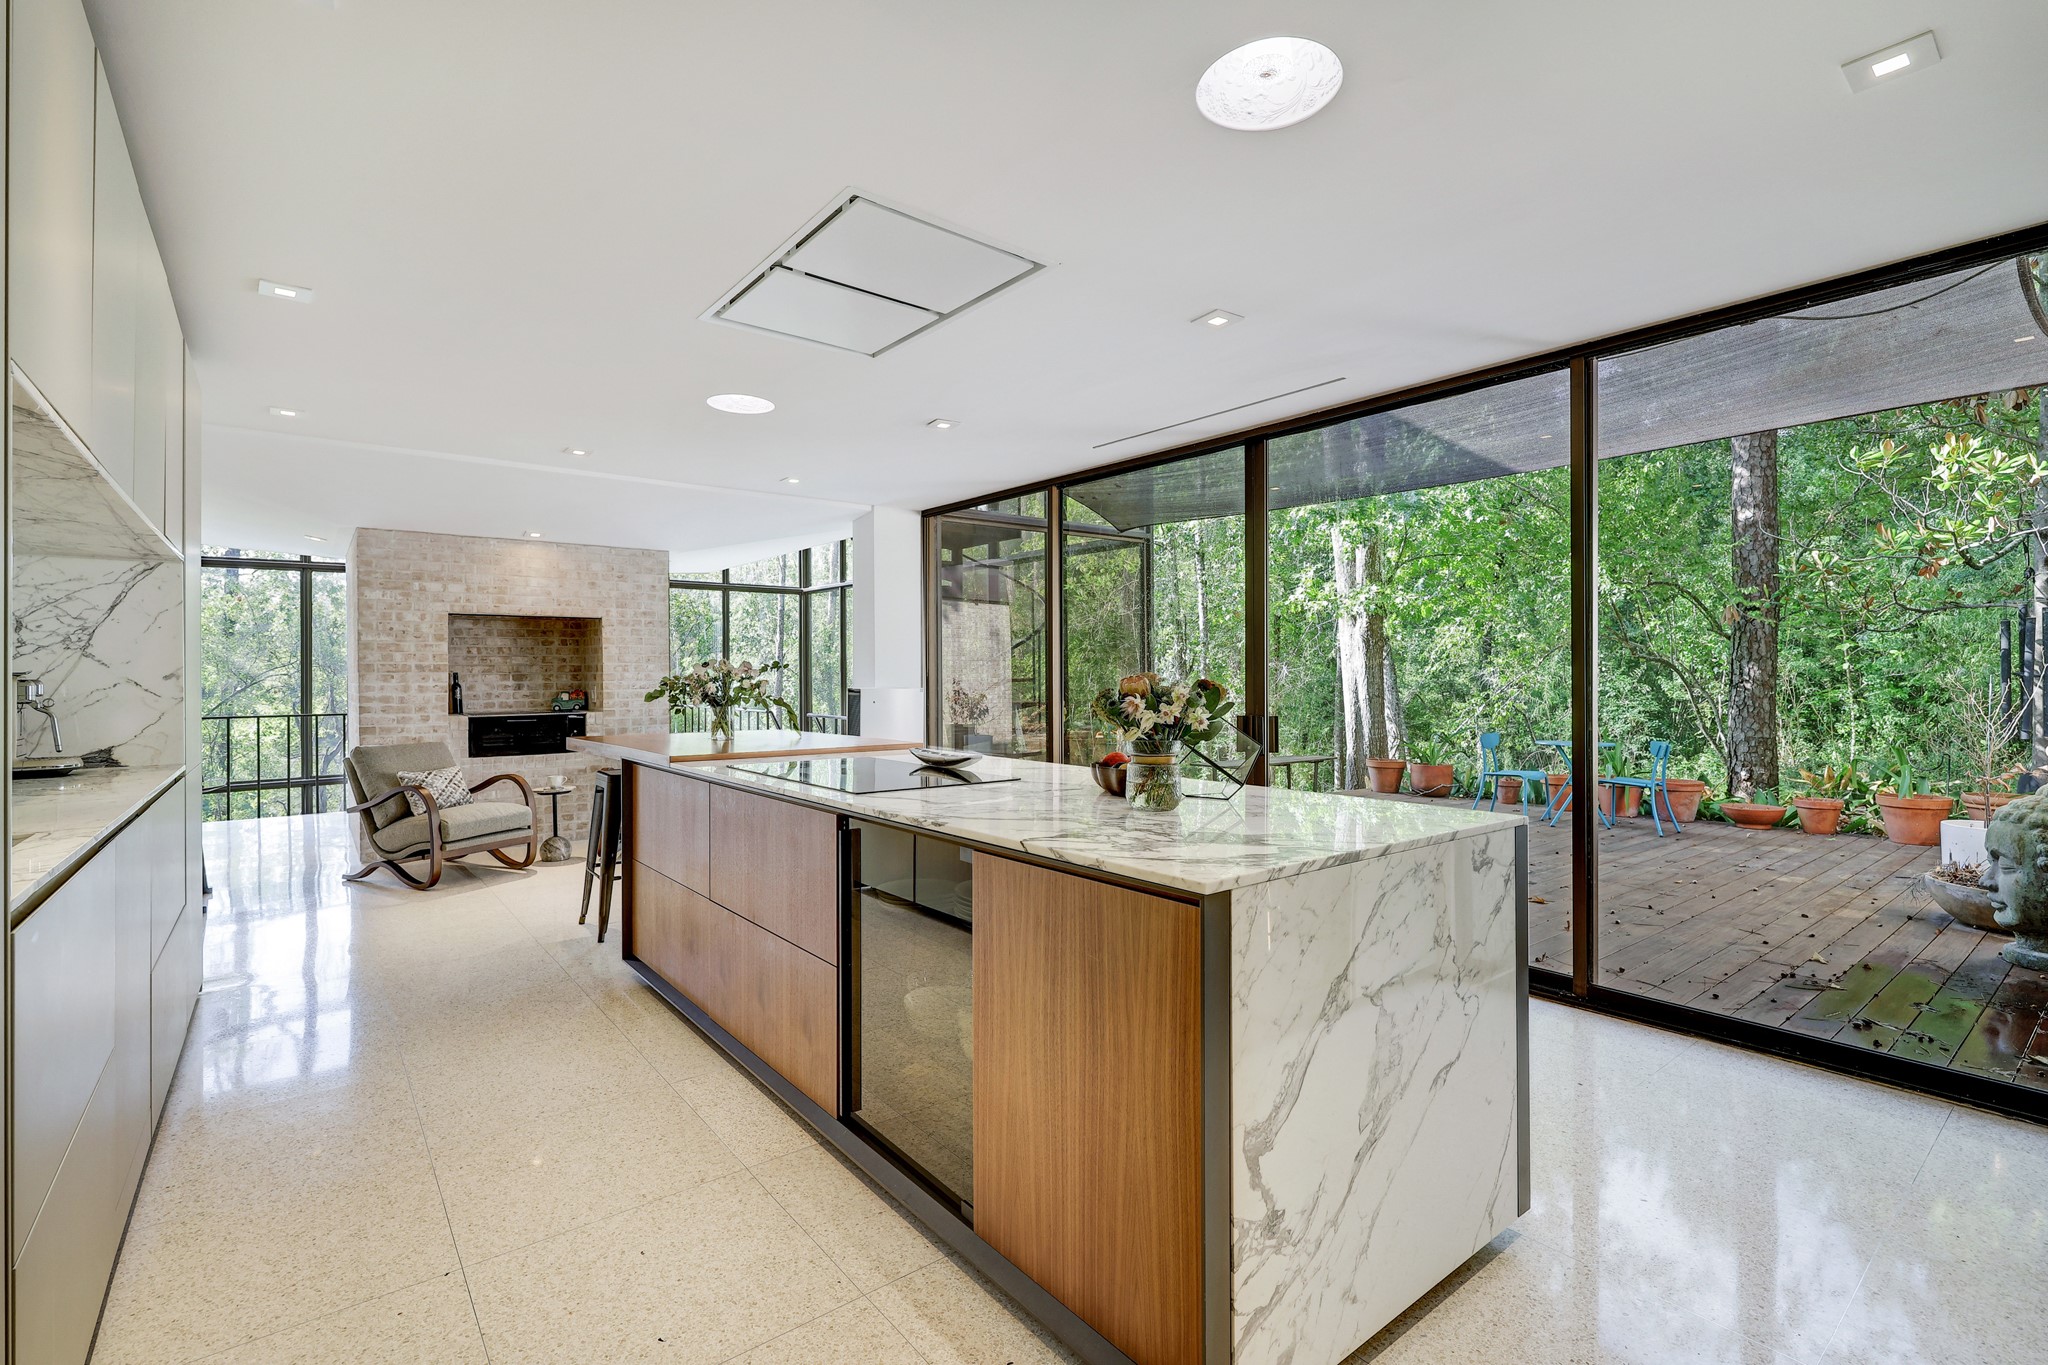 [Kitchen / Sitting Area]
Note waterfall statuario countertop on the island and wall of glass slider doors to the adjoining ipe deck.